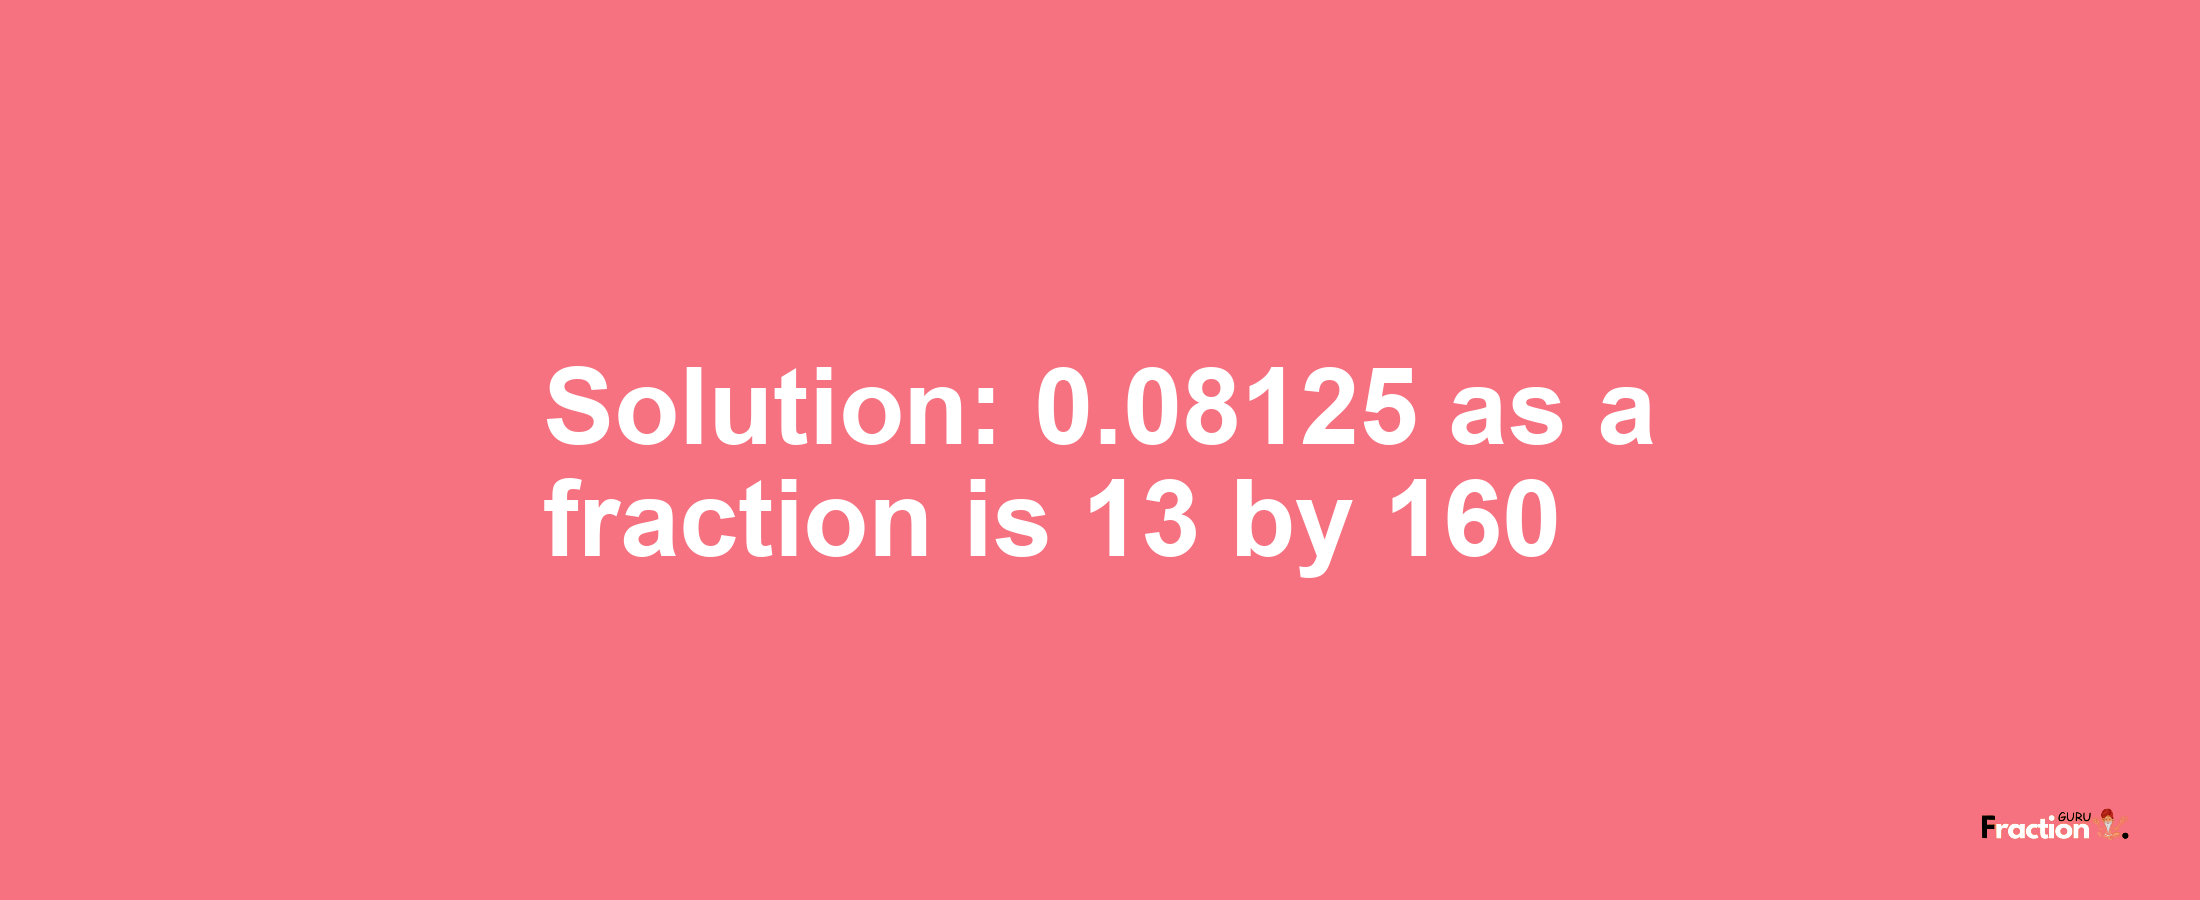 Solution:0.08125 as a fraction is 13/160